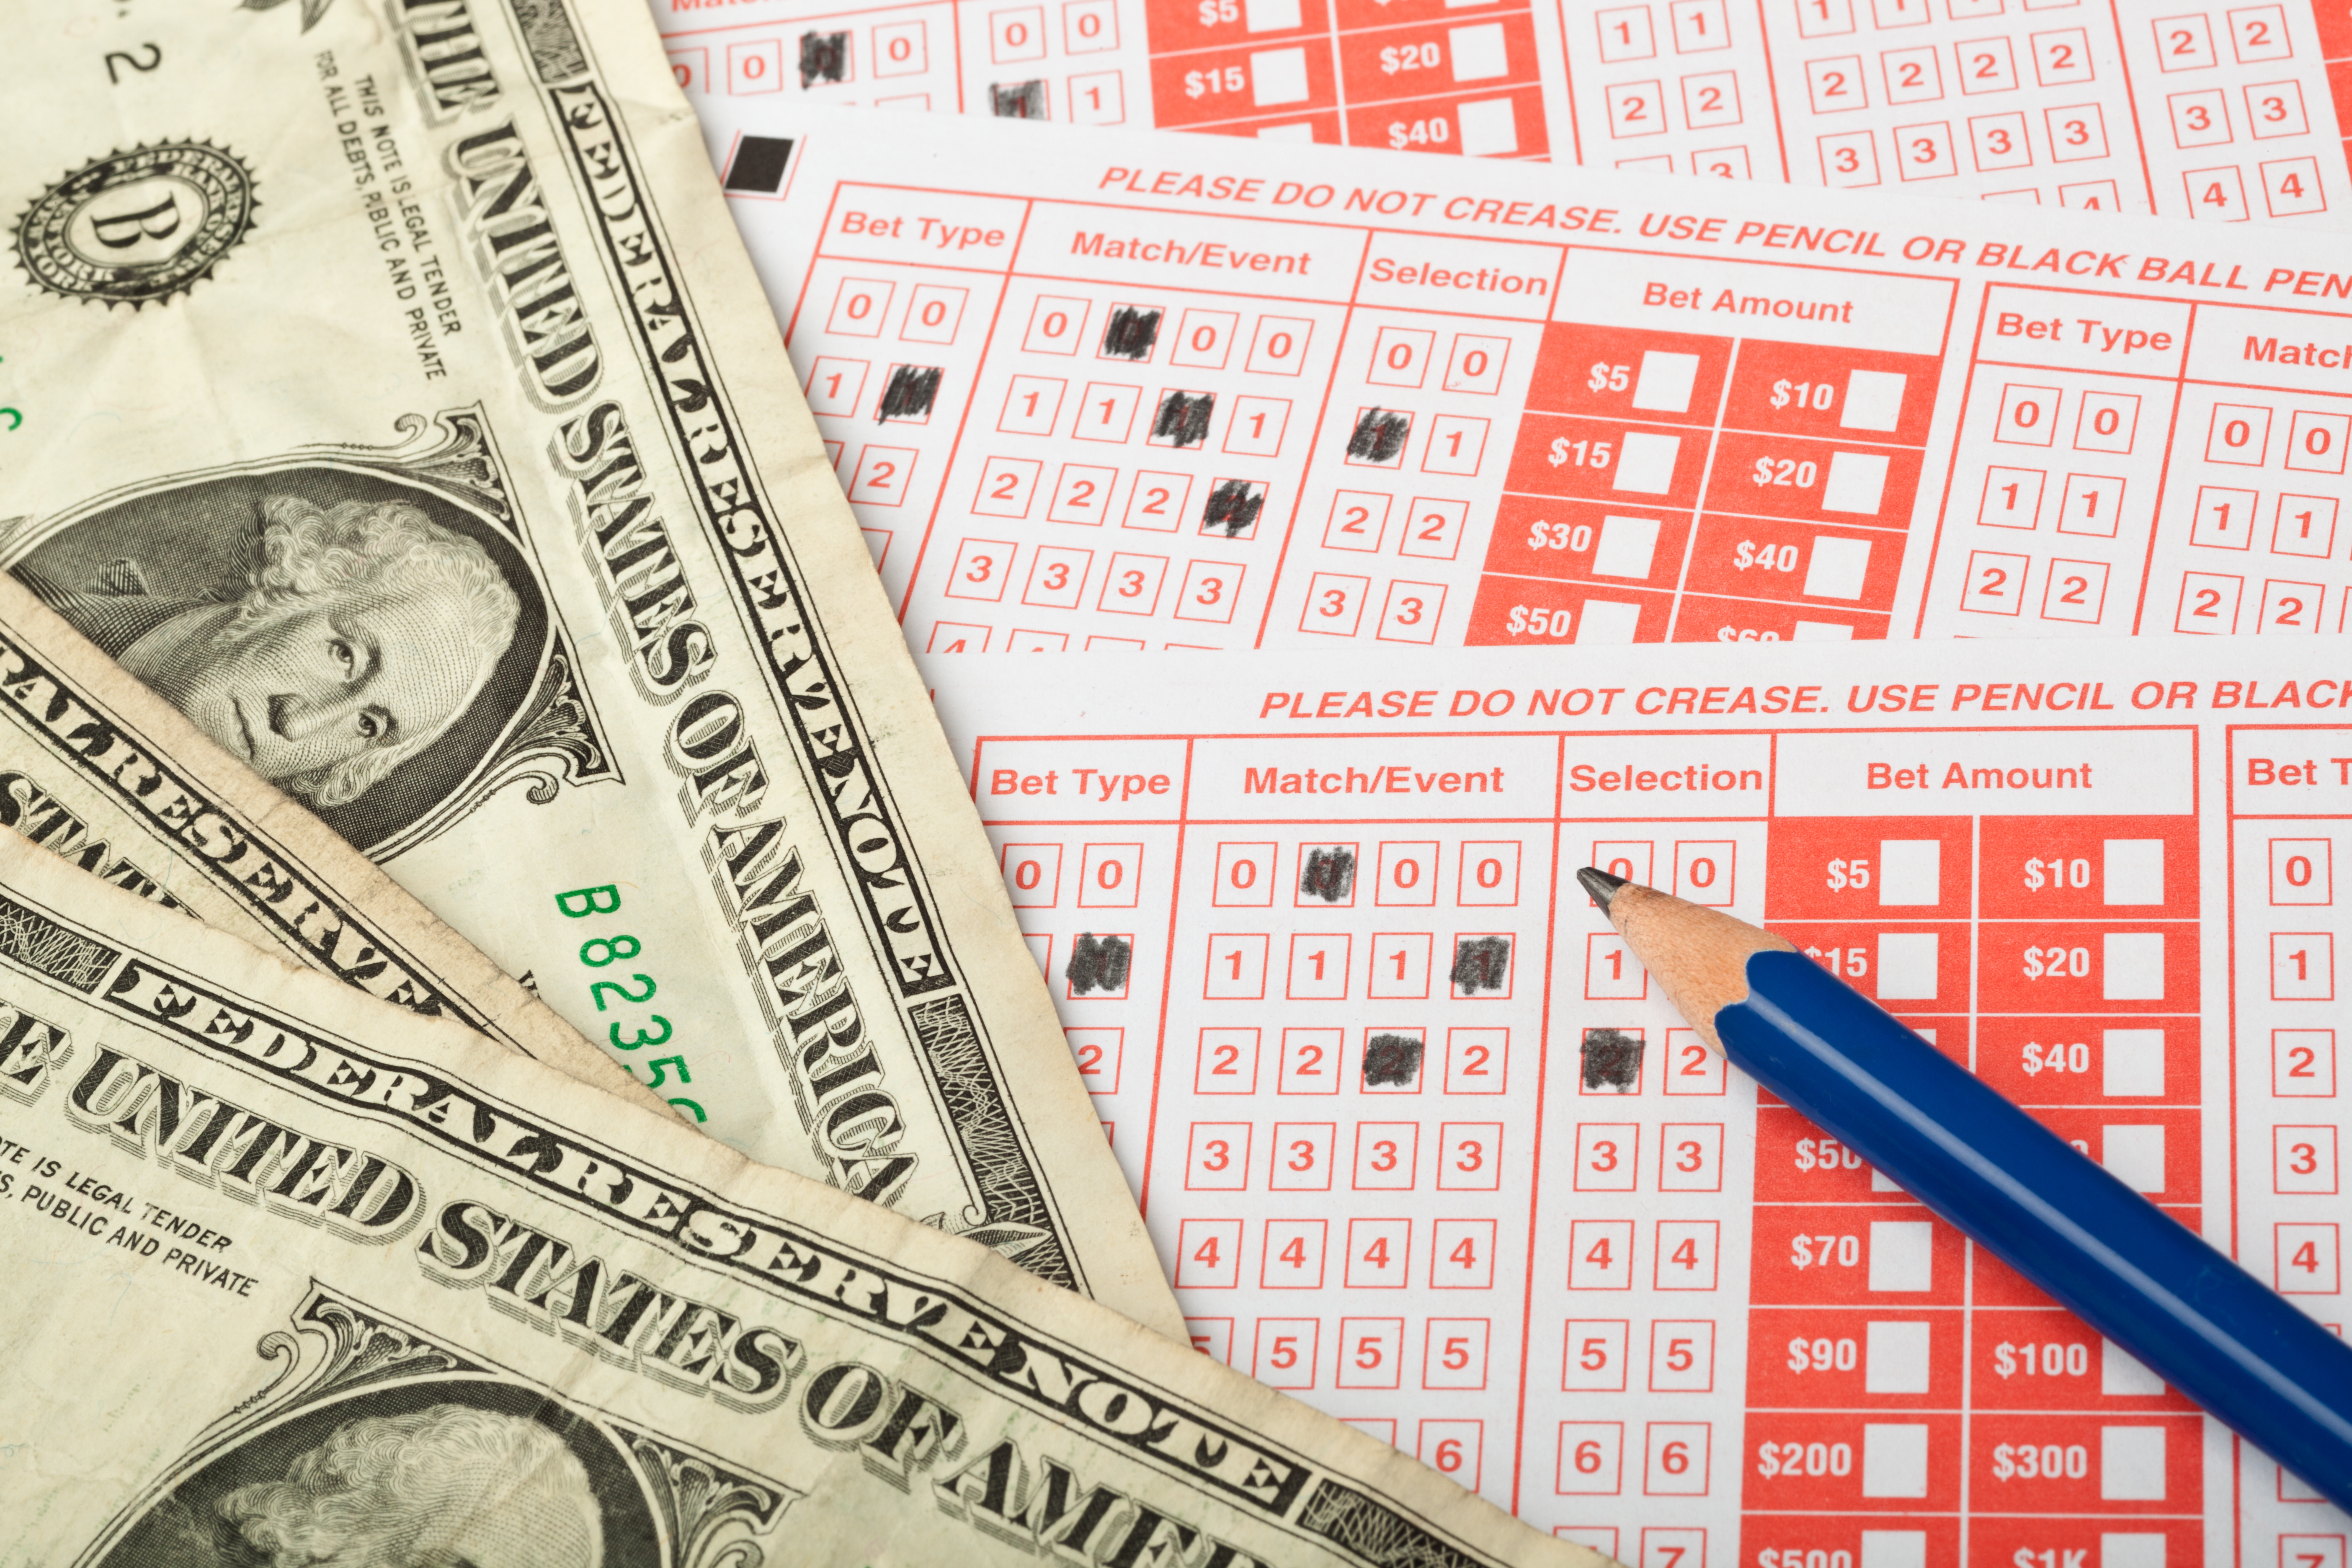 Dollar bills and a blue pencil lying on top of red-and-white bettin slips.